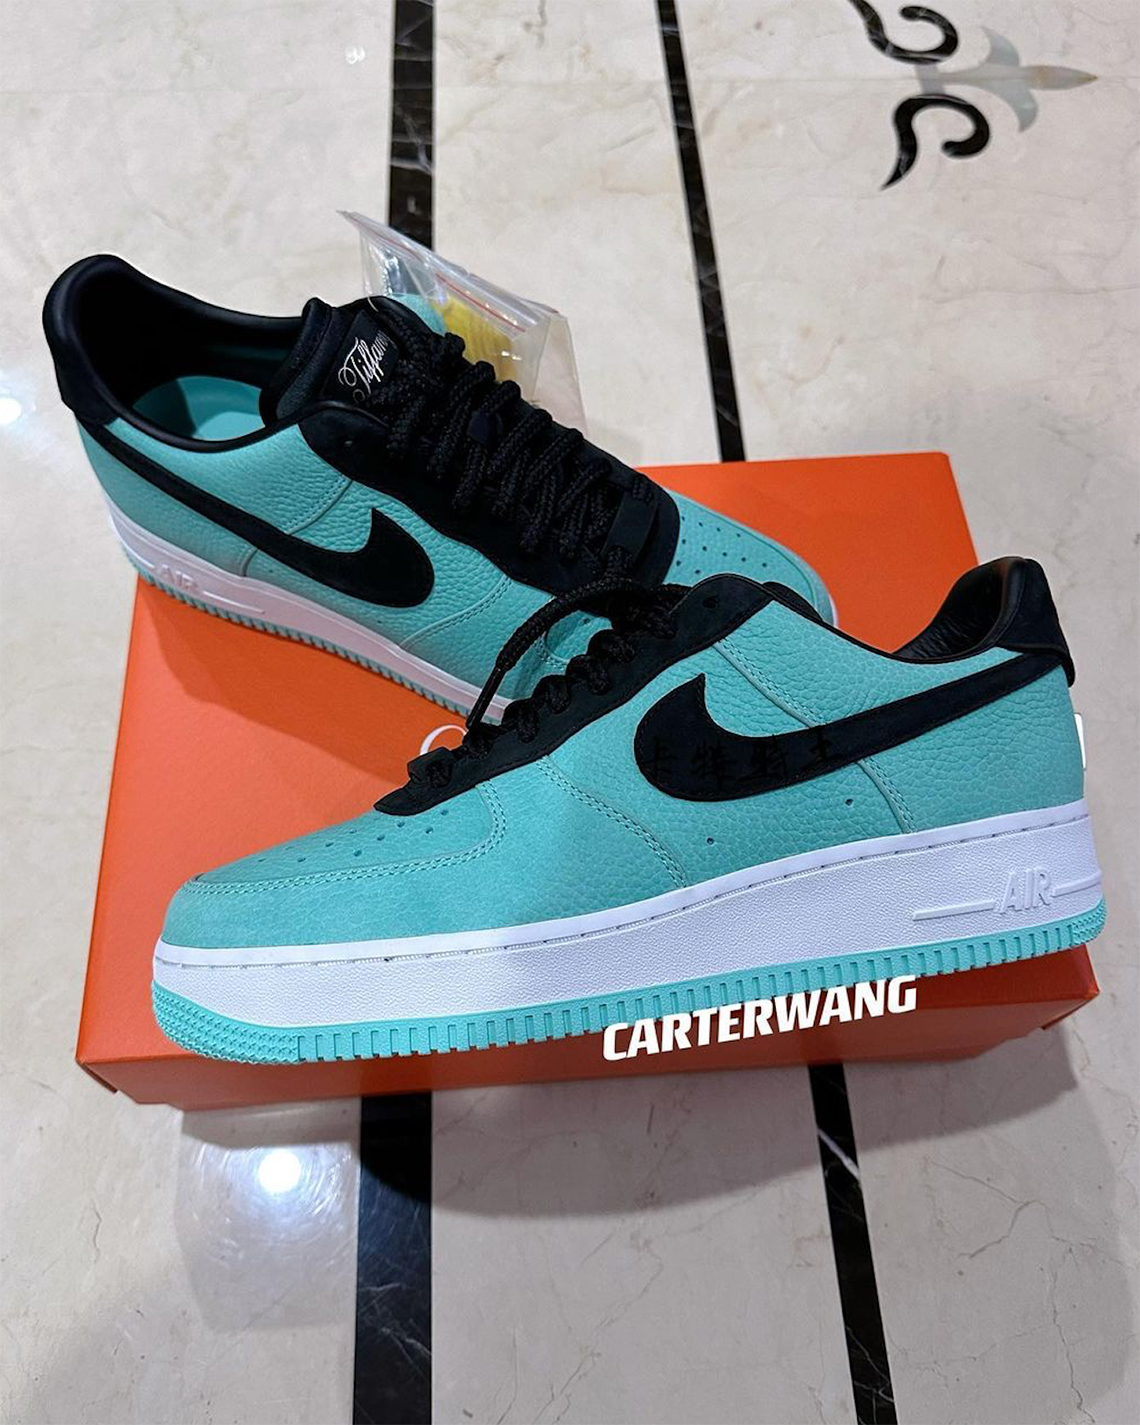 Tiffany And Co Nike Air Force 1 Low Sample | SneakerNews.com